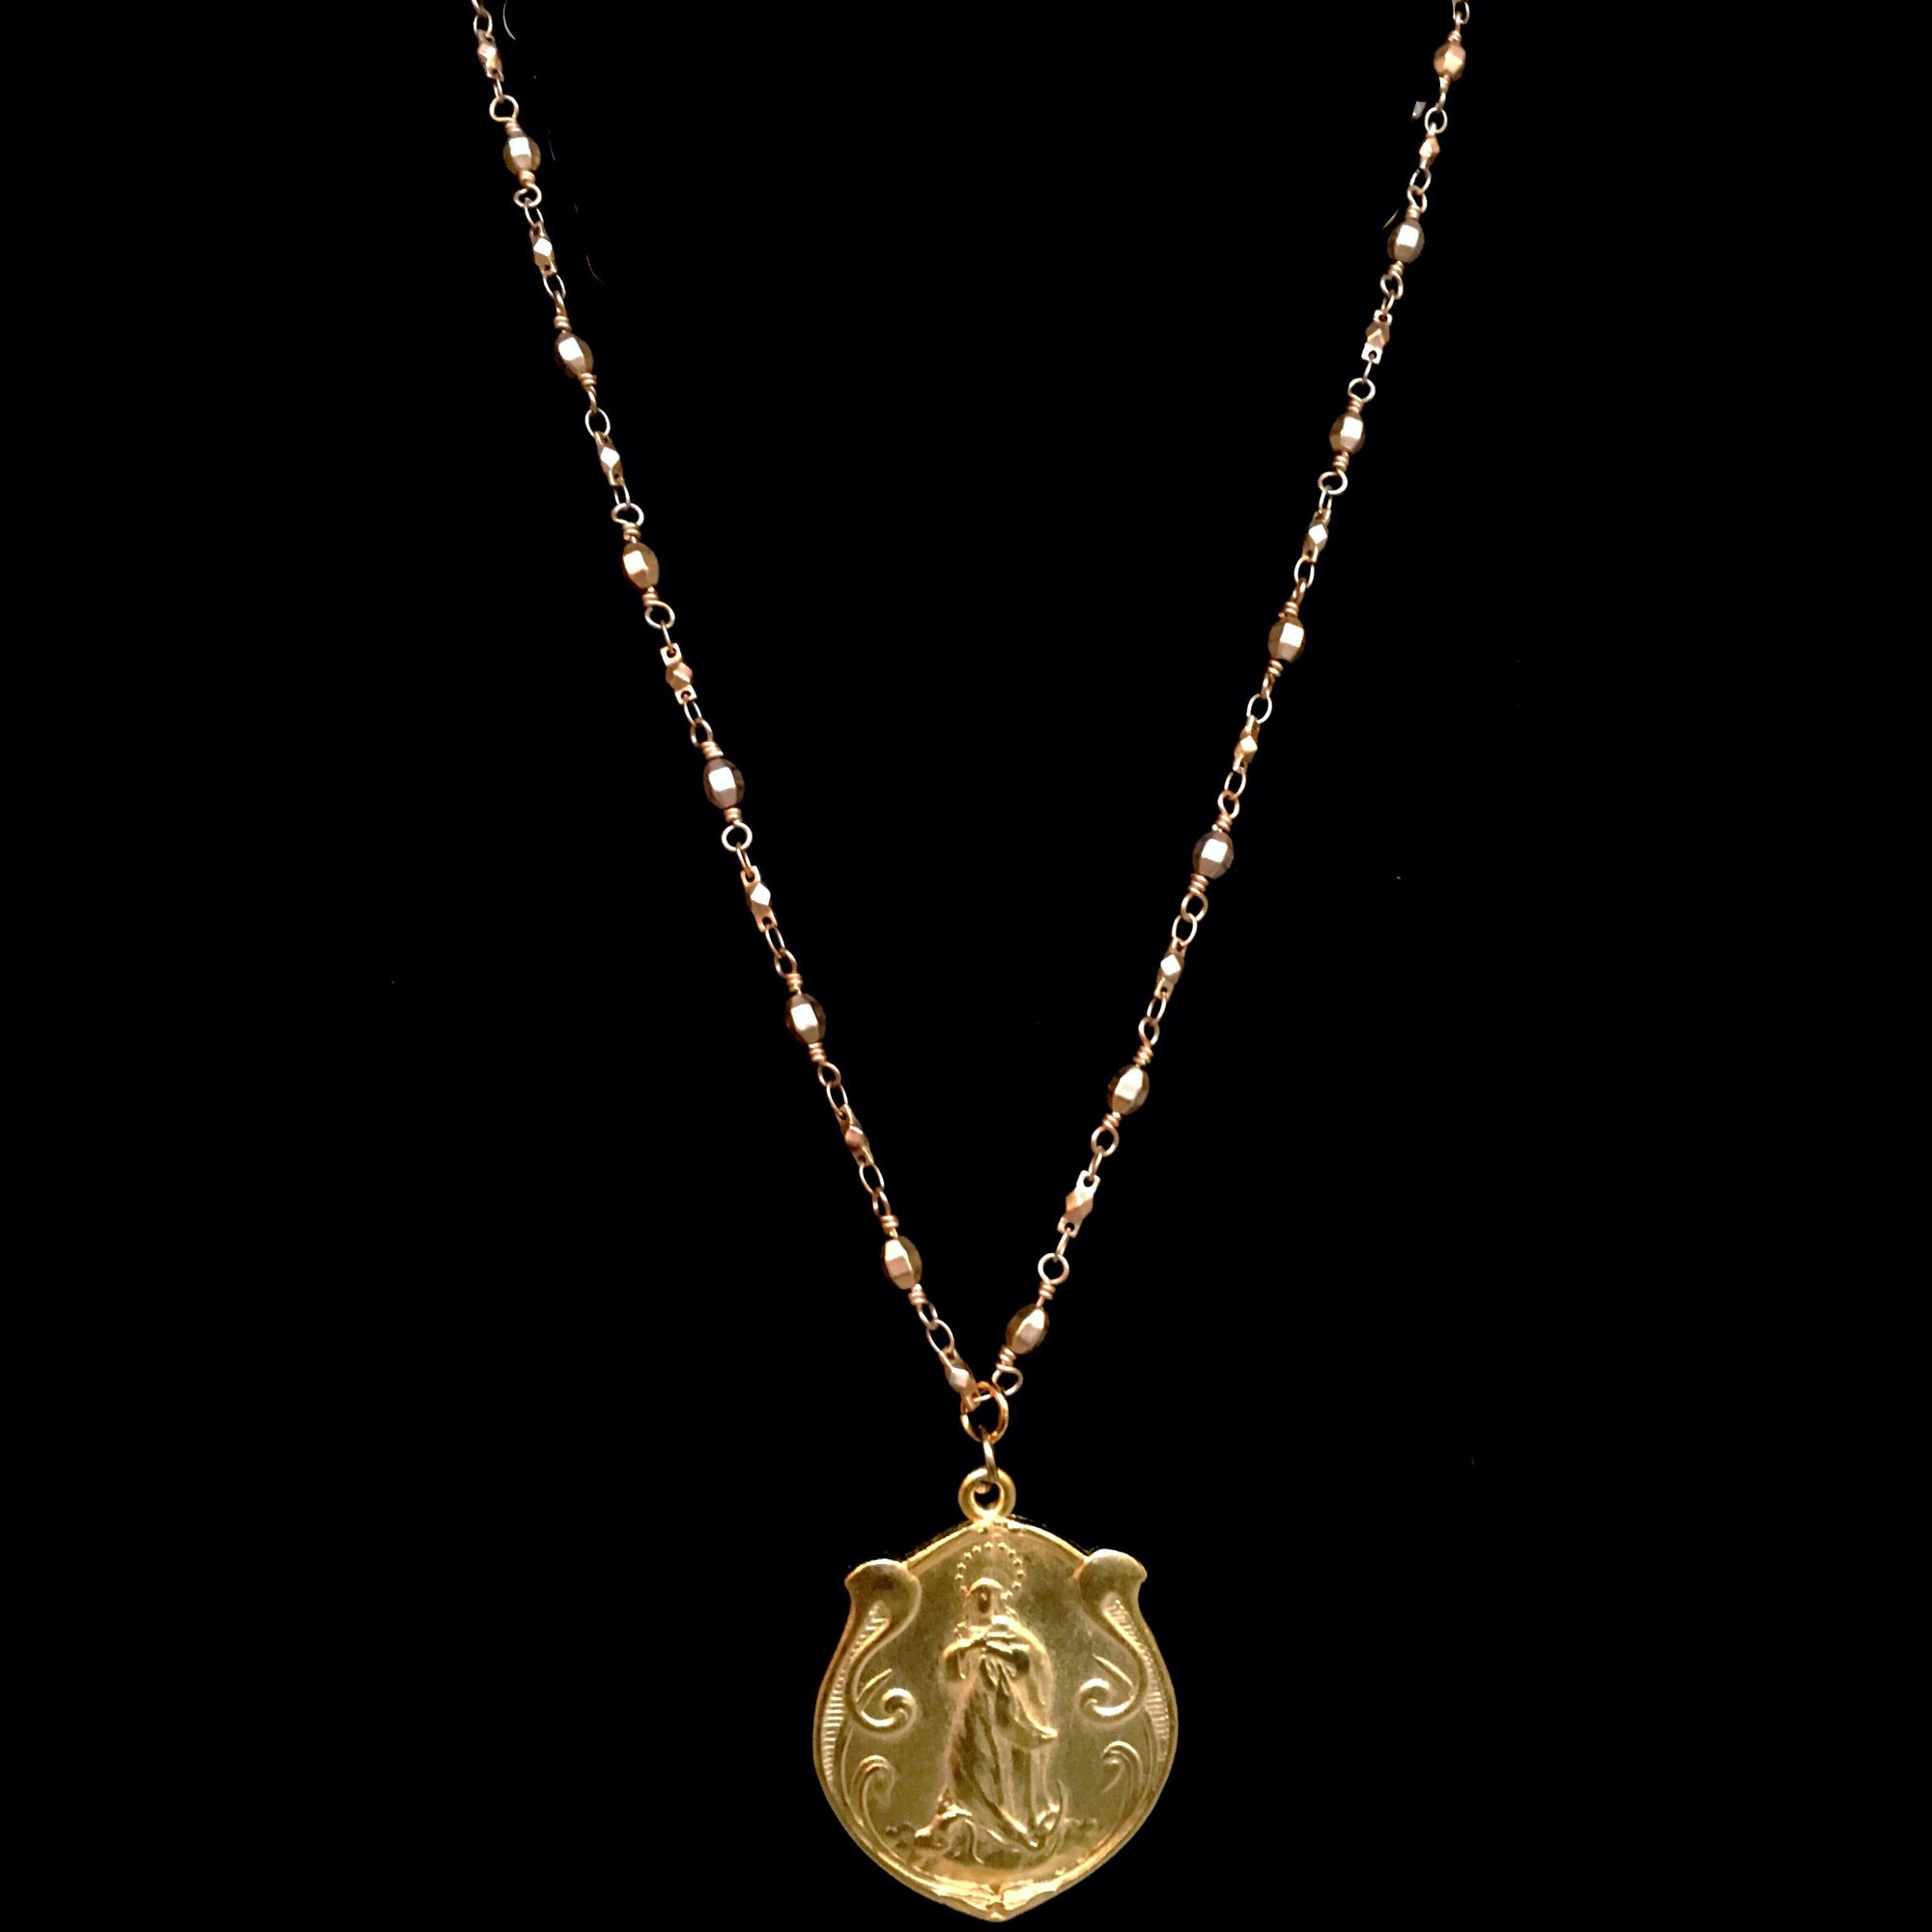 Assumption Art Nouveau Madonna Chain Necklace  by Whispering Goddess - Gold